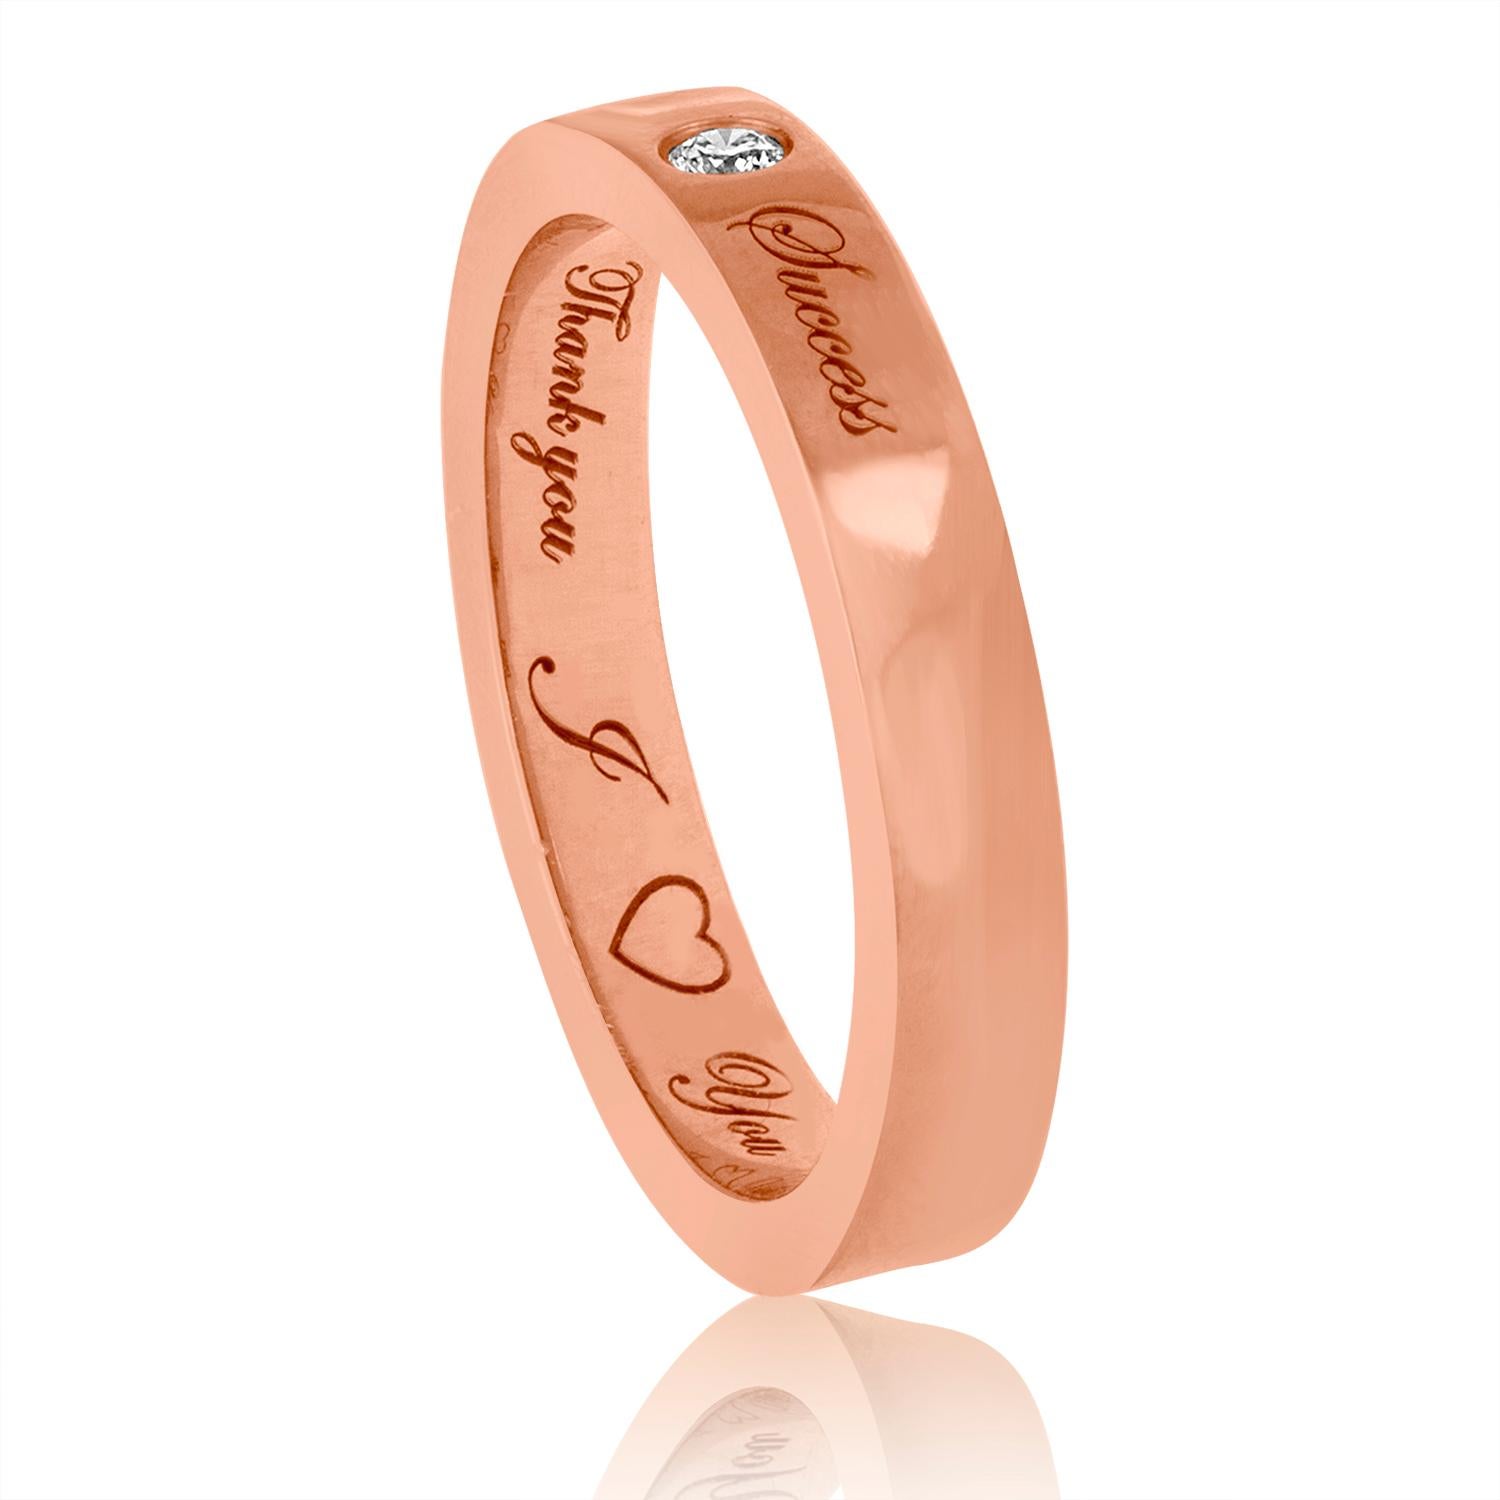 Very unusual wedding band.
The band is 18K Rose Gold.
There are 0.03 Carat Diamond G SI.
There are three inscriptions:.
